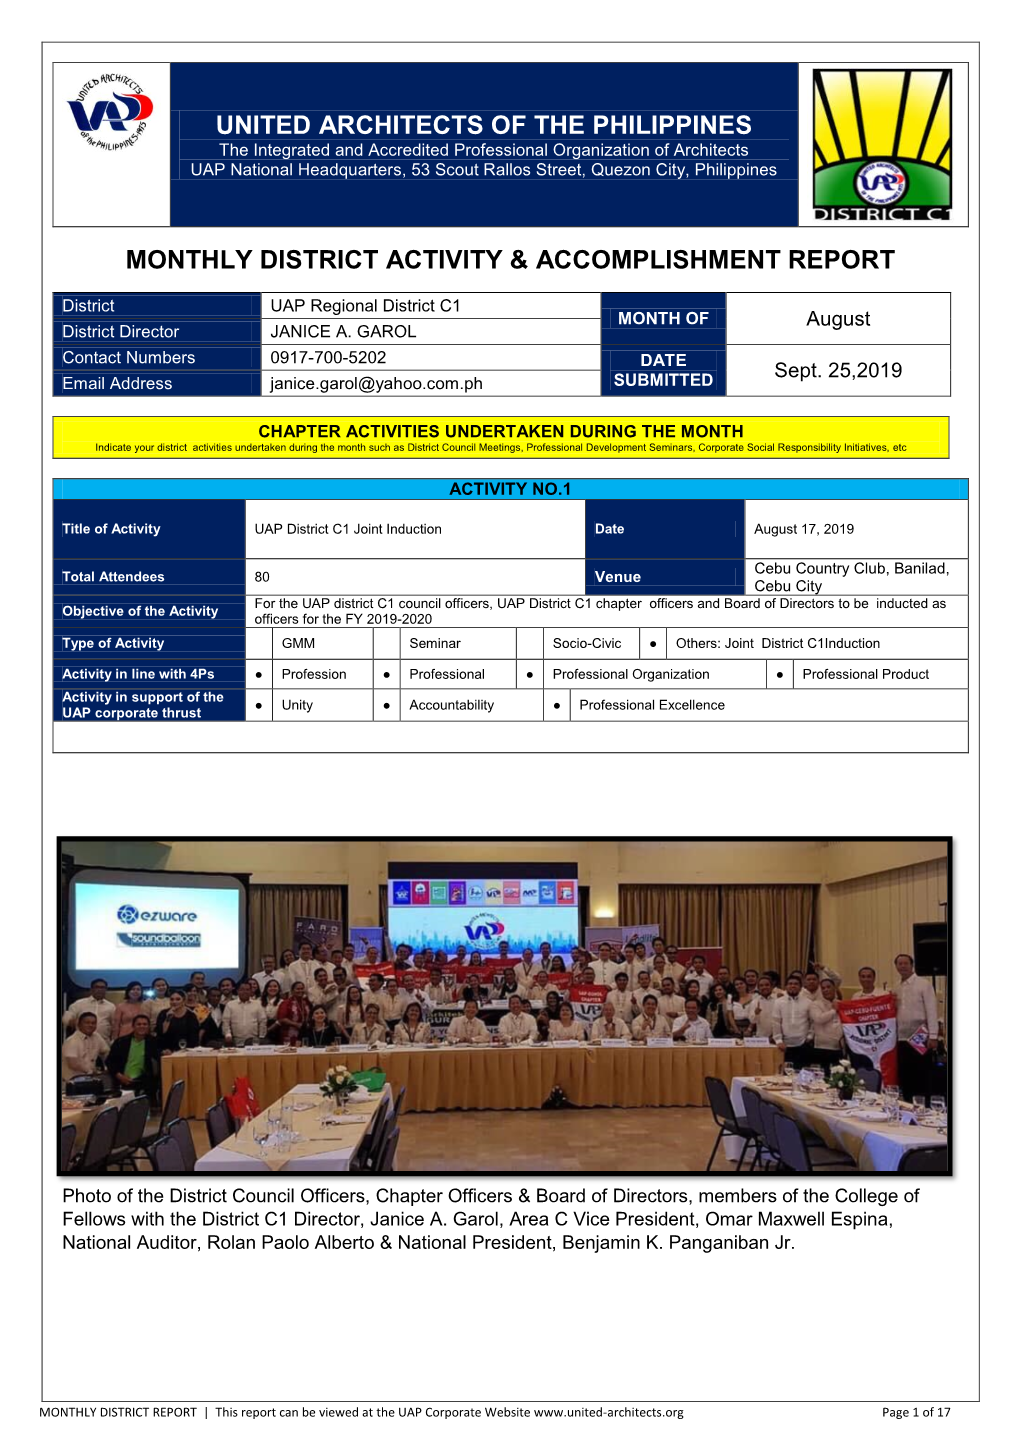 UAP District C1 Joint Induction Date August 17, 2019